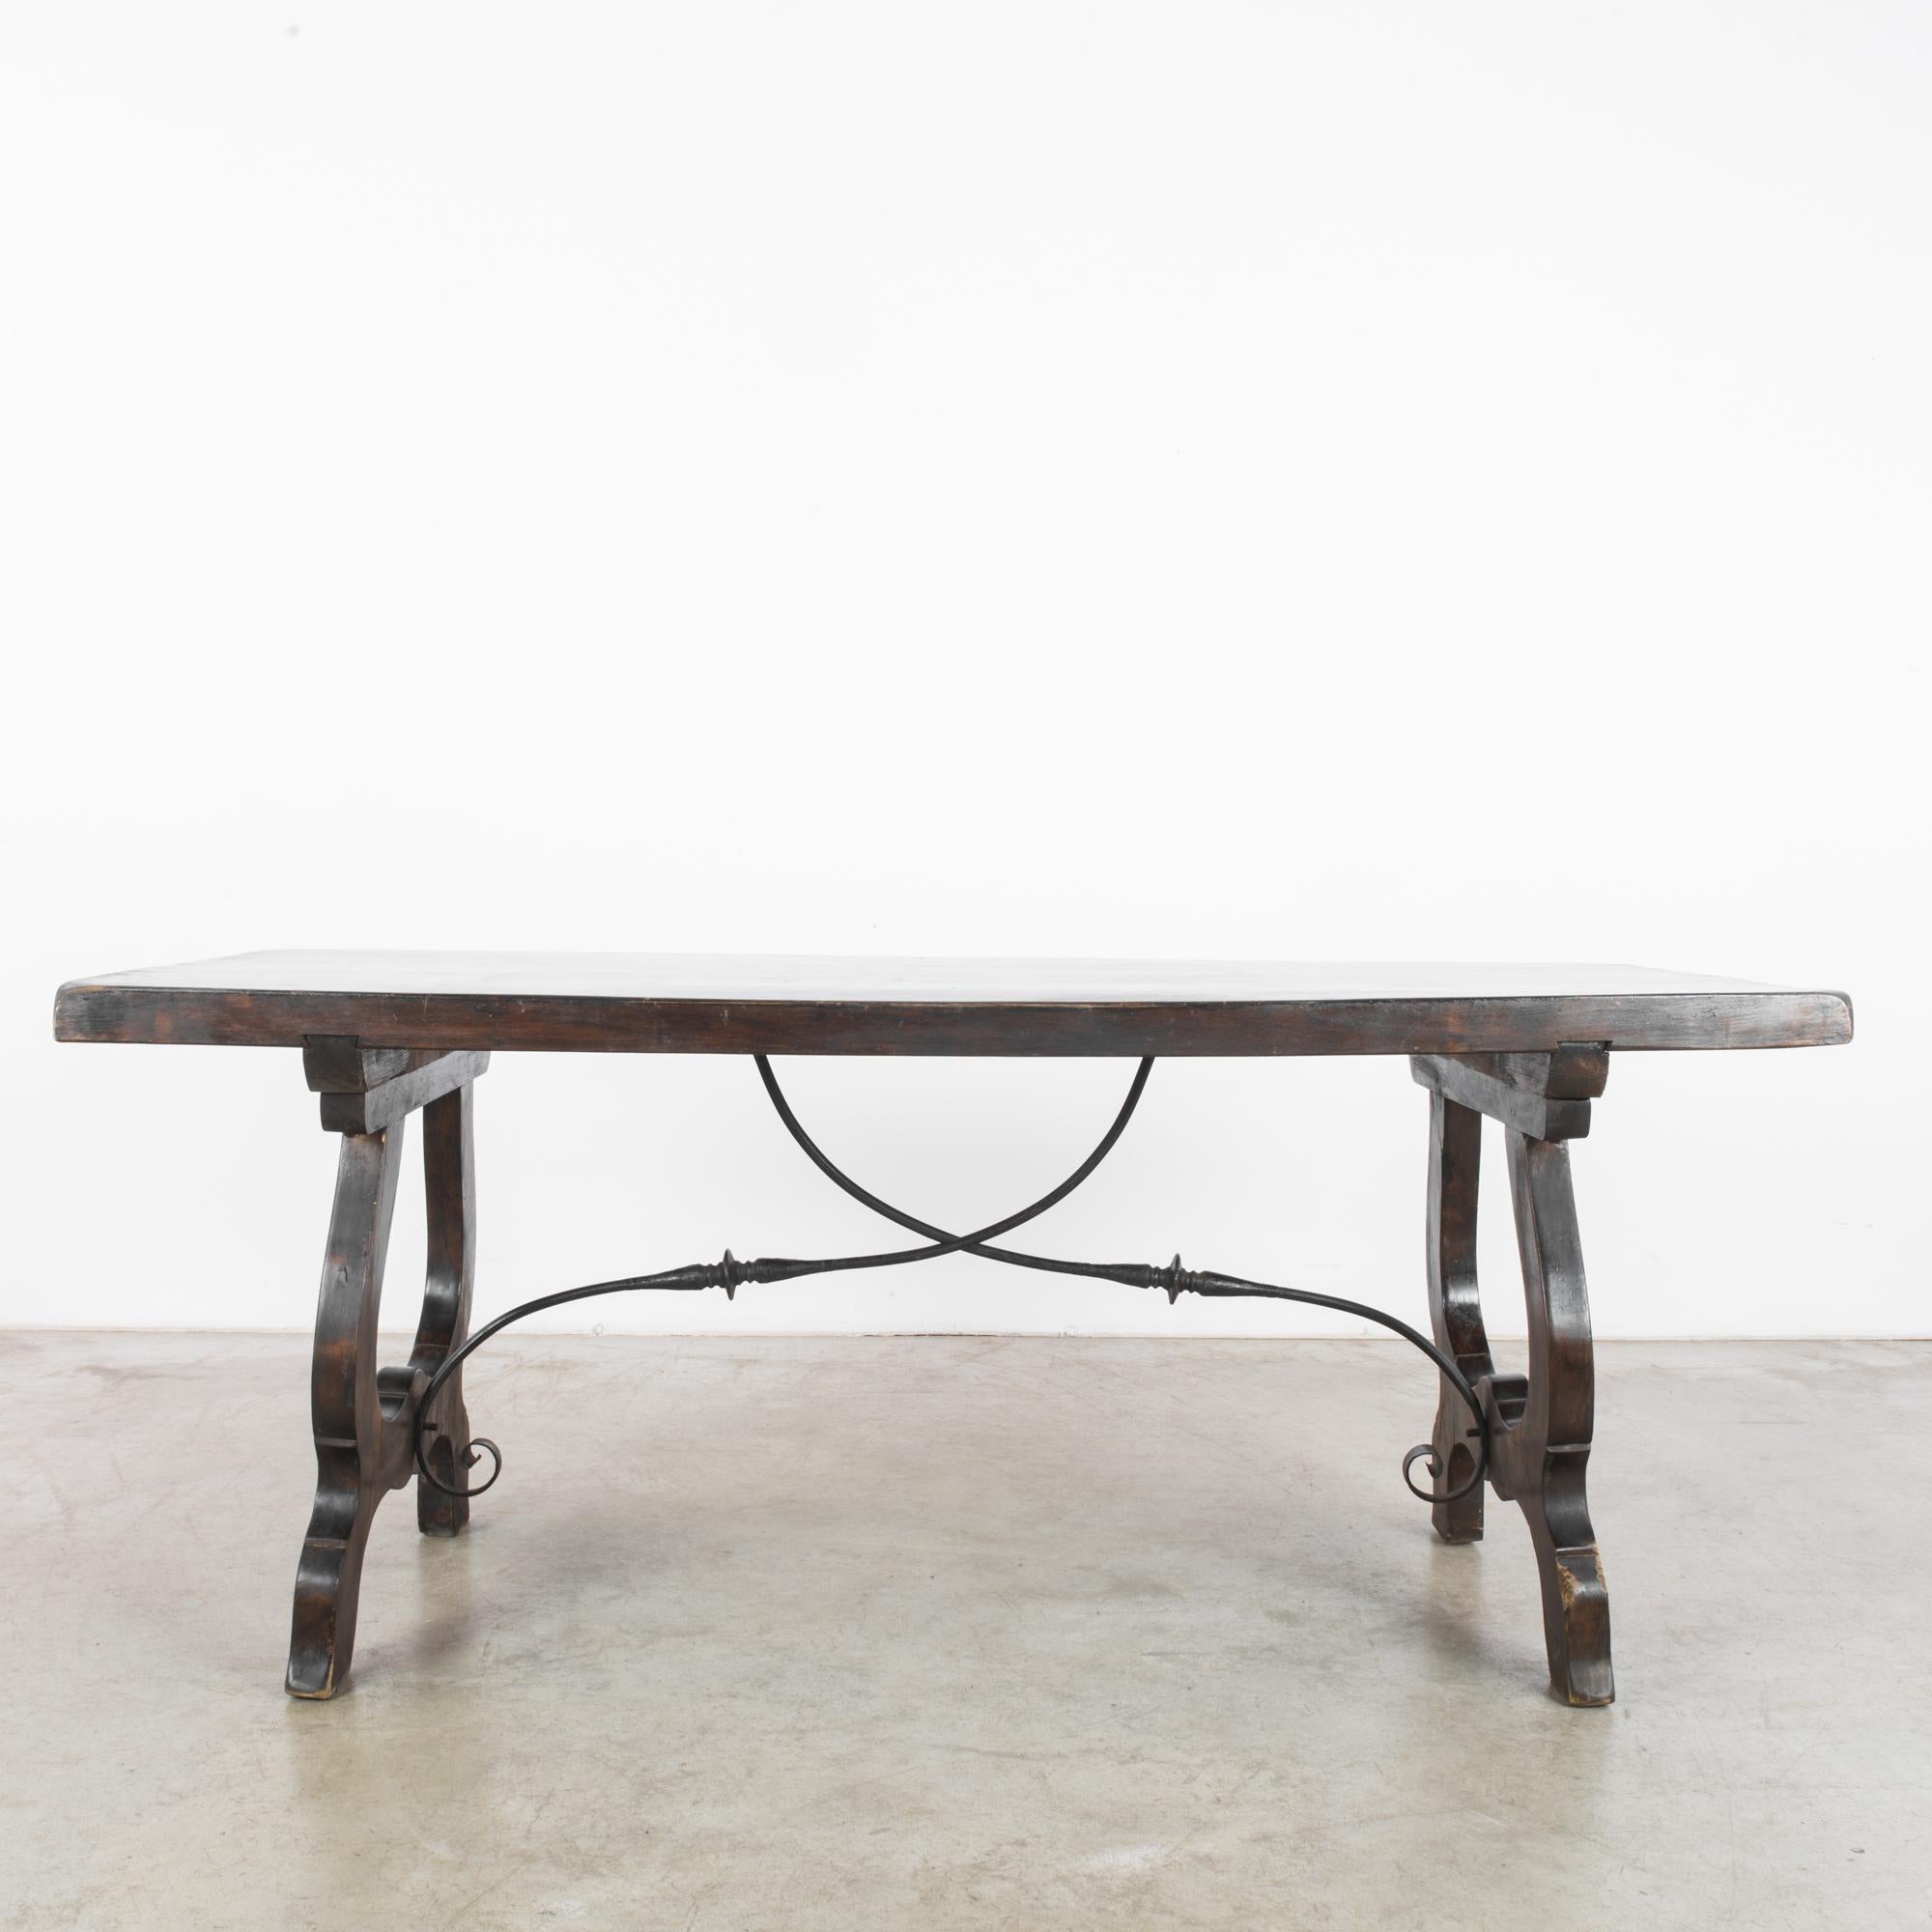 A wooden dining table from Belgium, circa 1960. Lyre-shaped legs support the broad slab of the tabletop. The dark wood has a rich, burnished tone. Beneath the tabletop, curving cast iron tendrils swoop and intersect in romantic embellishment,